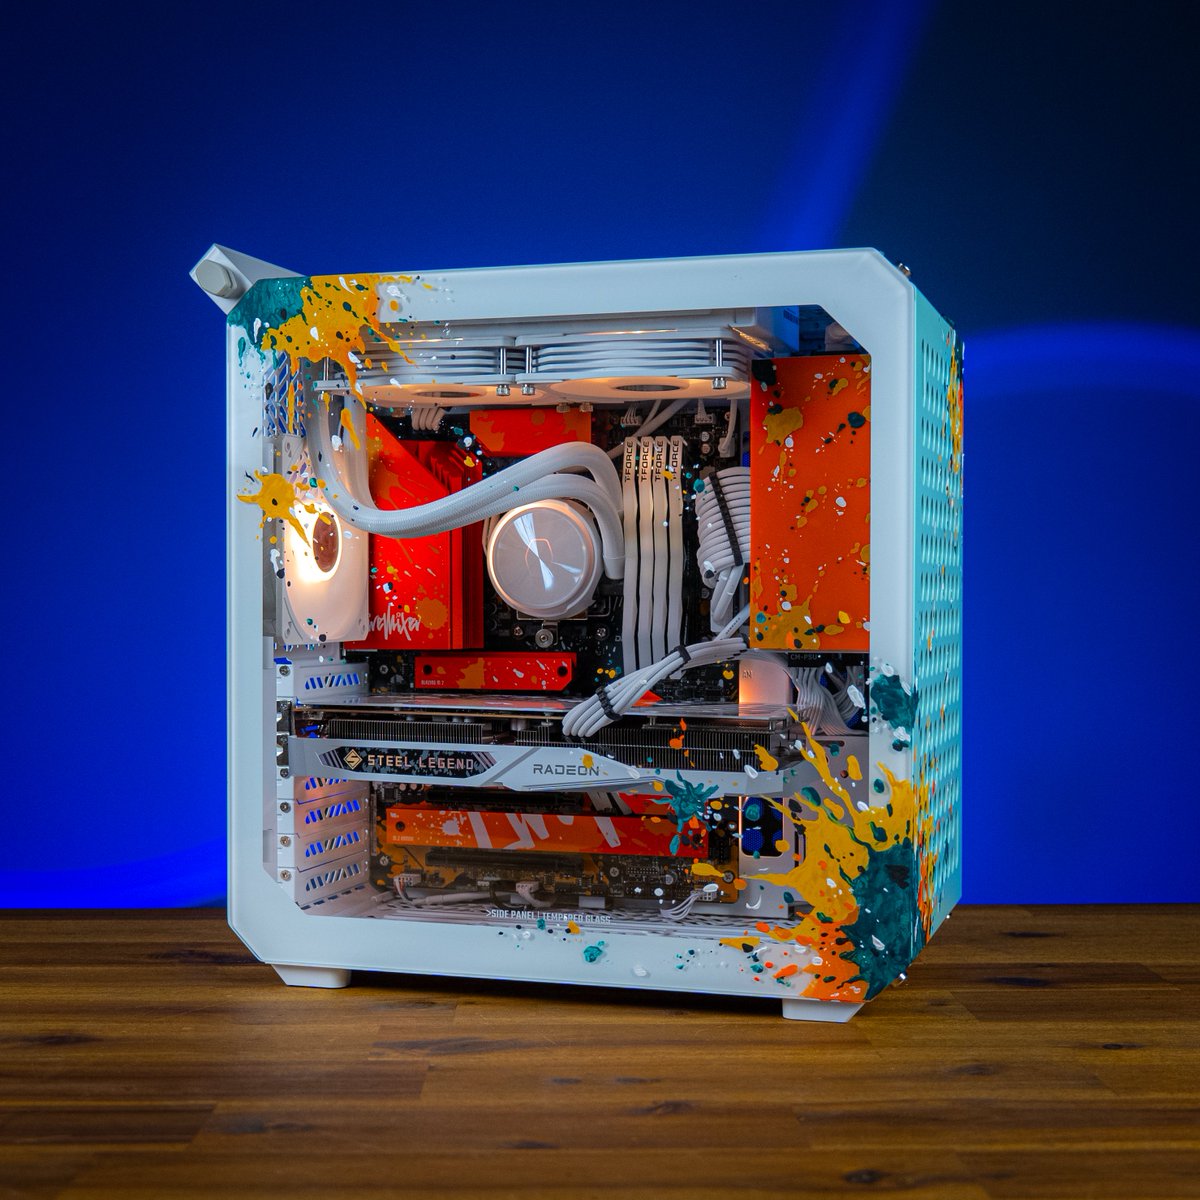 Hey modding enthusiasts! 🌈 Transform a plain case into a personal canvas with a splash, dab, or swirl. Unleash your unique vision and let creativity soar! No rules, just pure expression. 🎨
📷 @RonaldBodinger